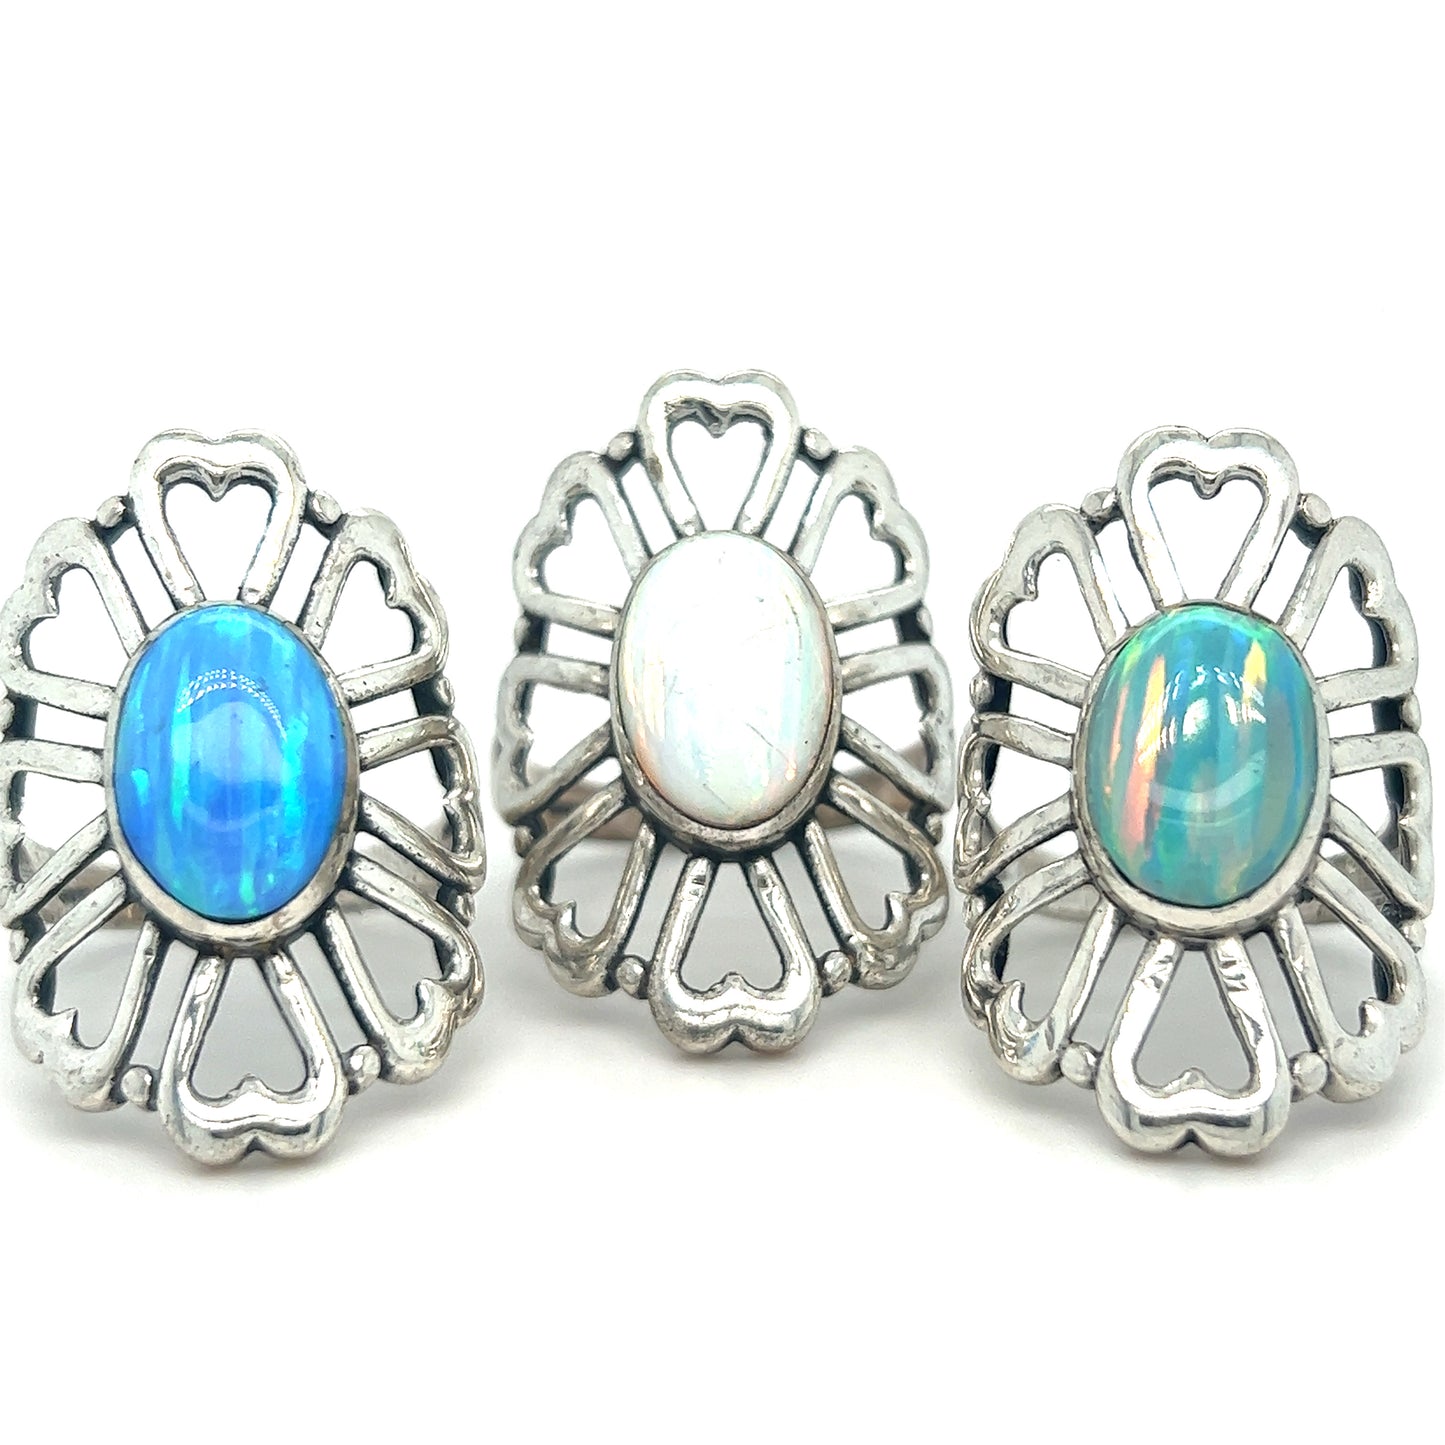 Super Silver's American Made Opal Flower Ring with Heart Shaped Petals features handcrafted silver rings embedded with opal stones.